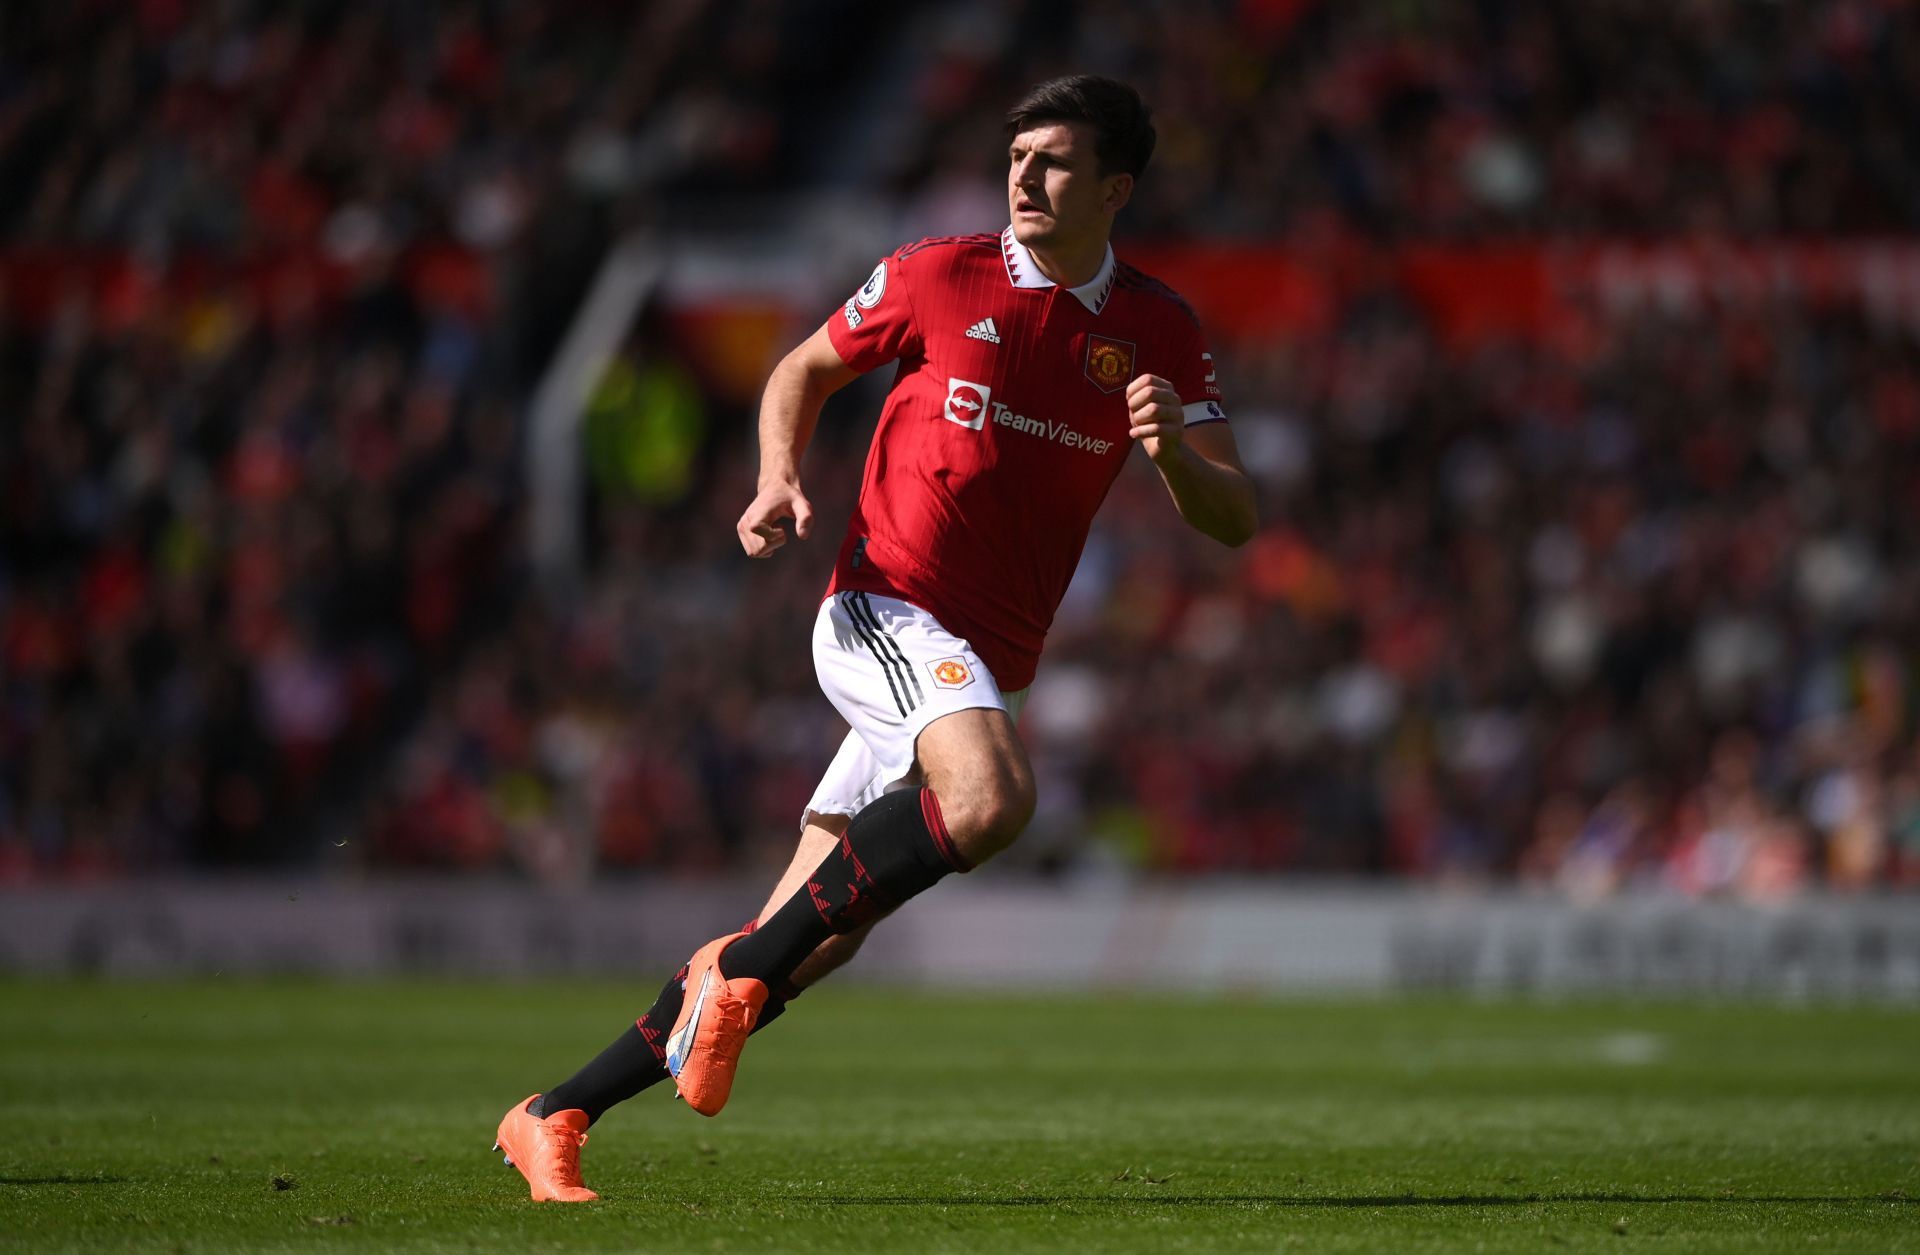 Manchester United have not lost with Maguire in the side since August.